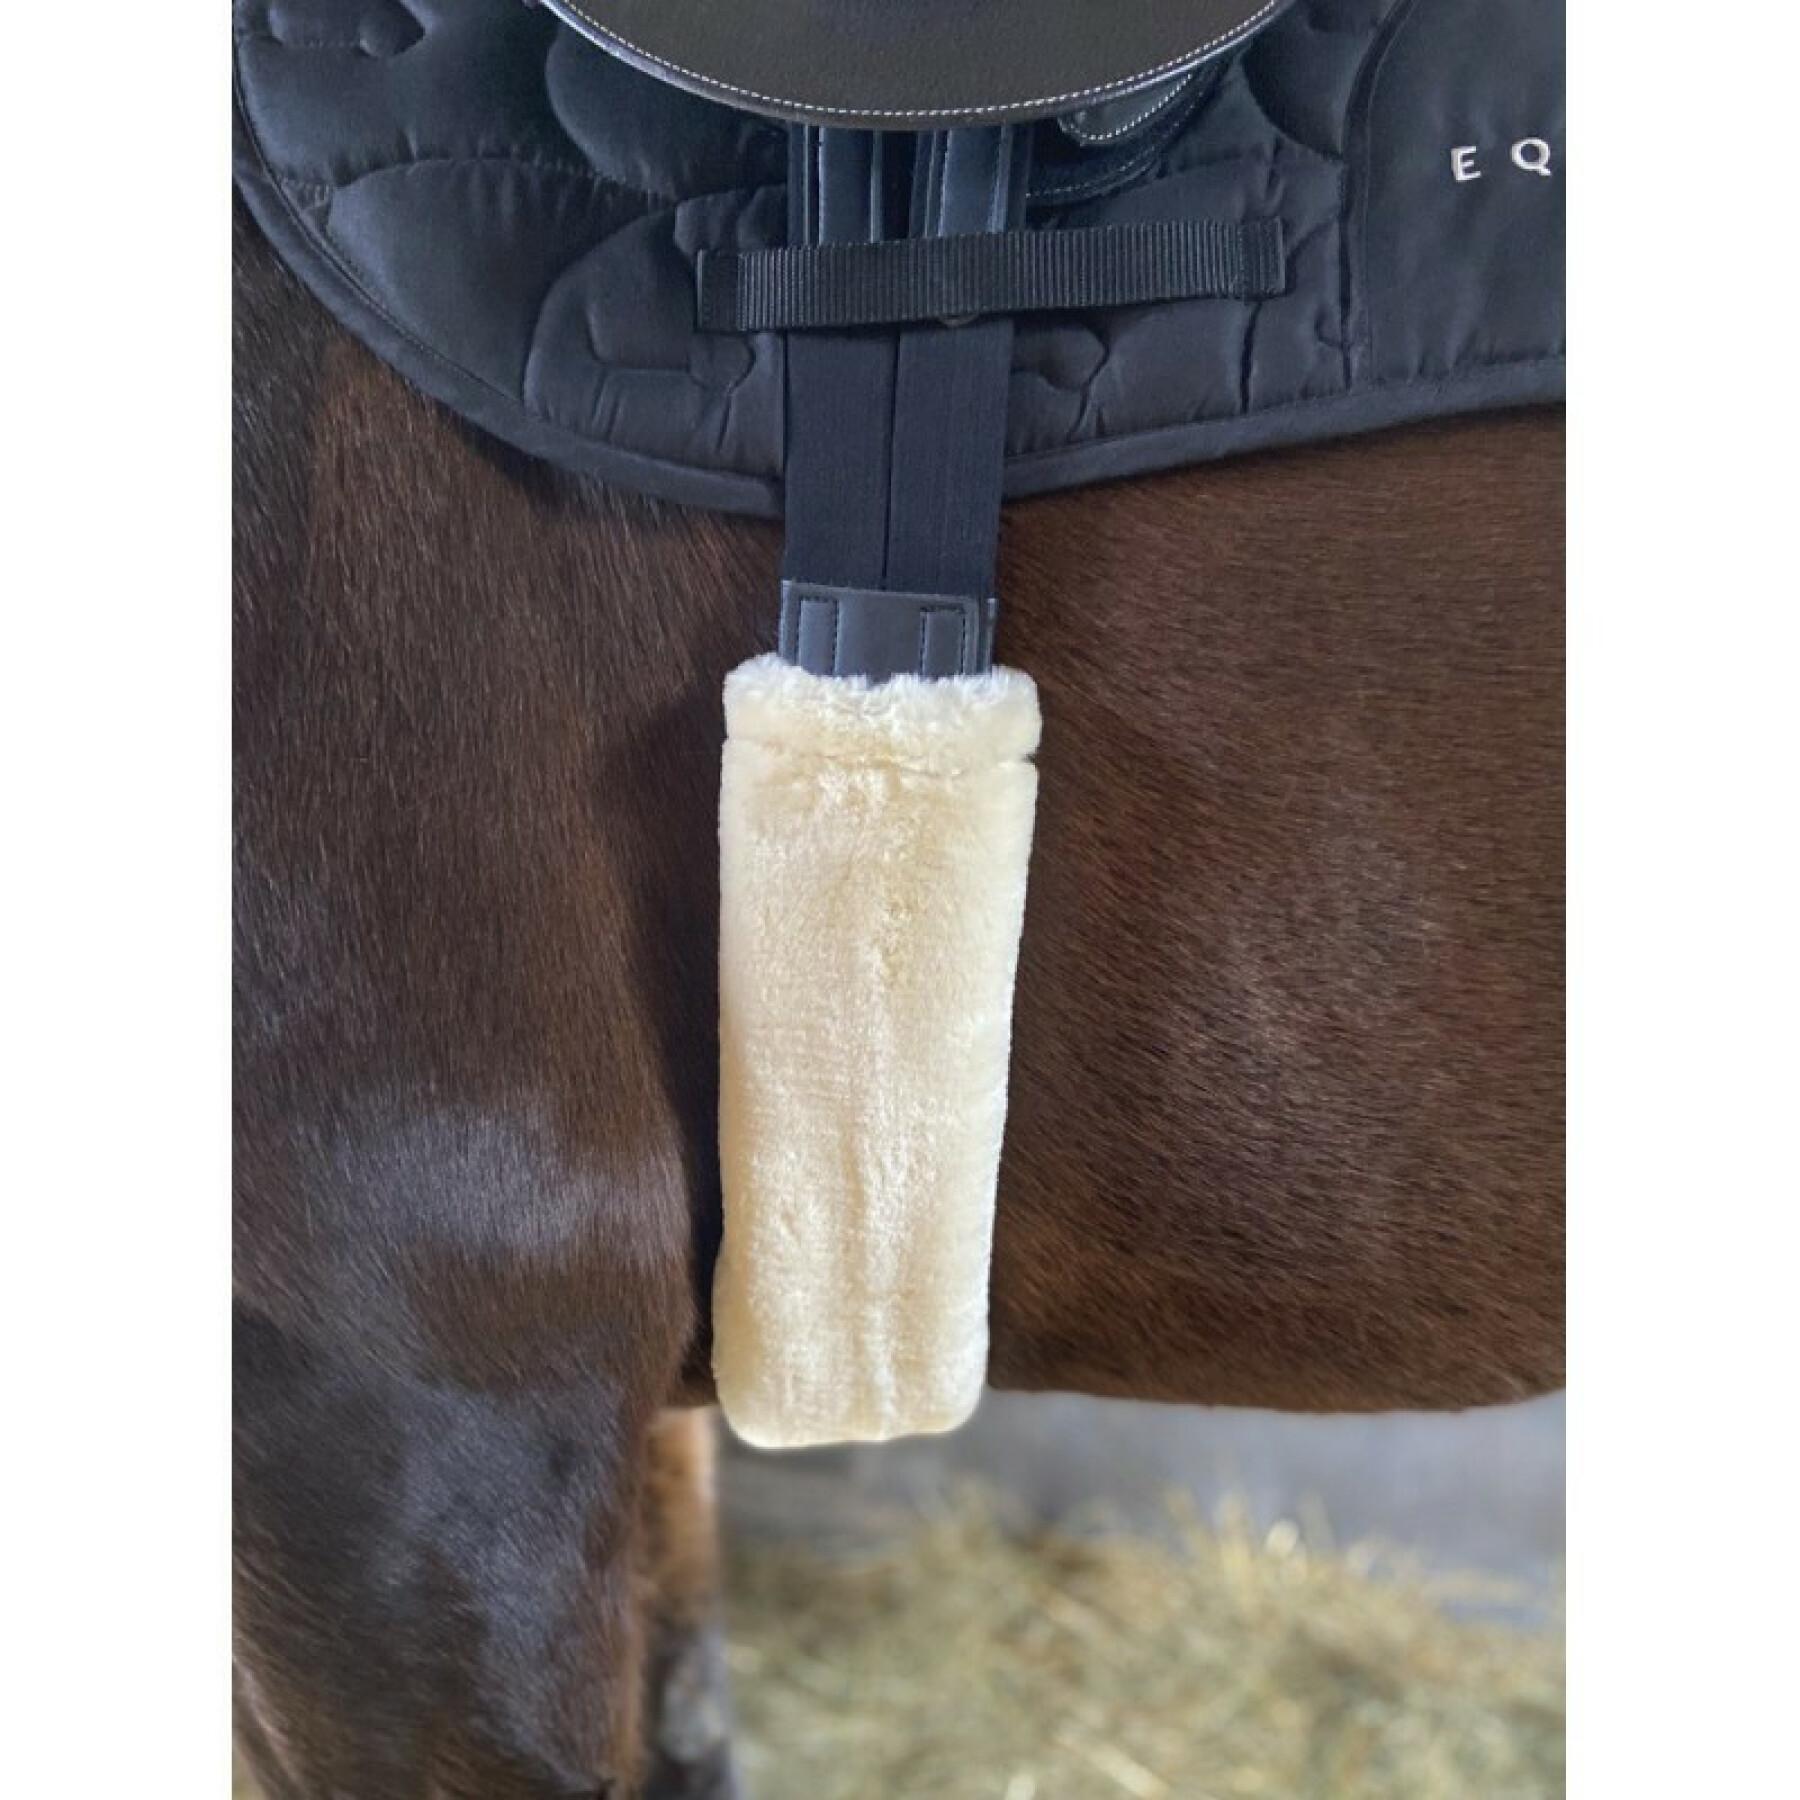 Strap scabbard for horse Equithème Teddy